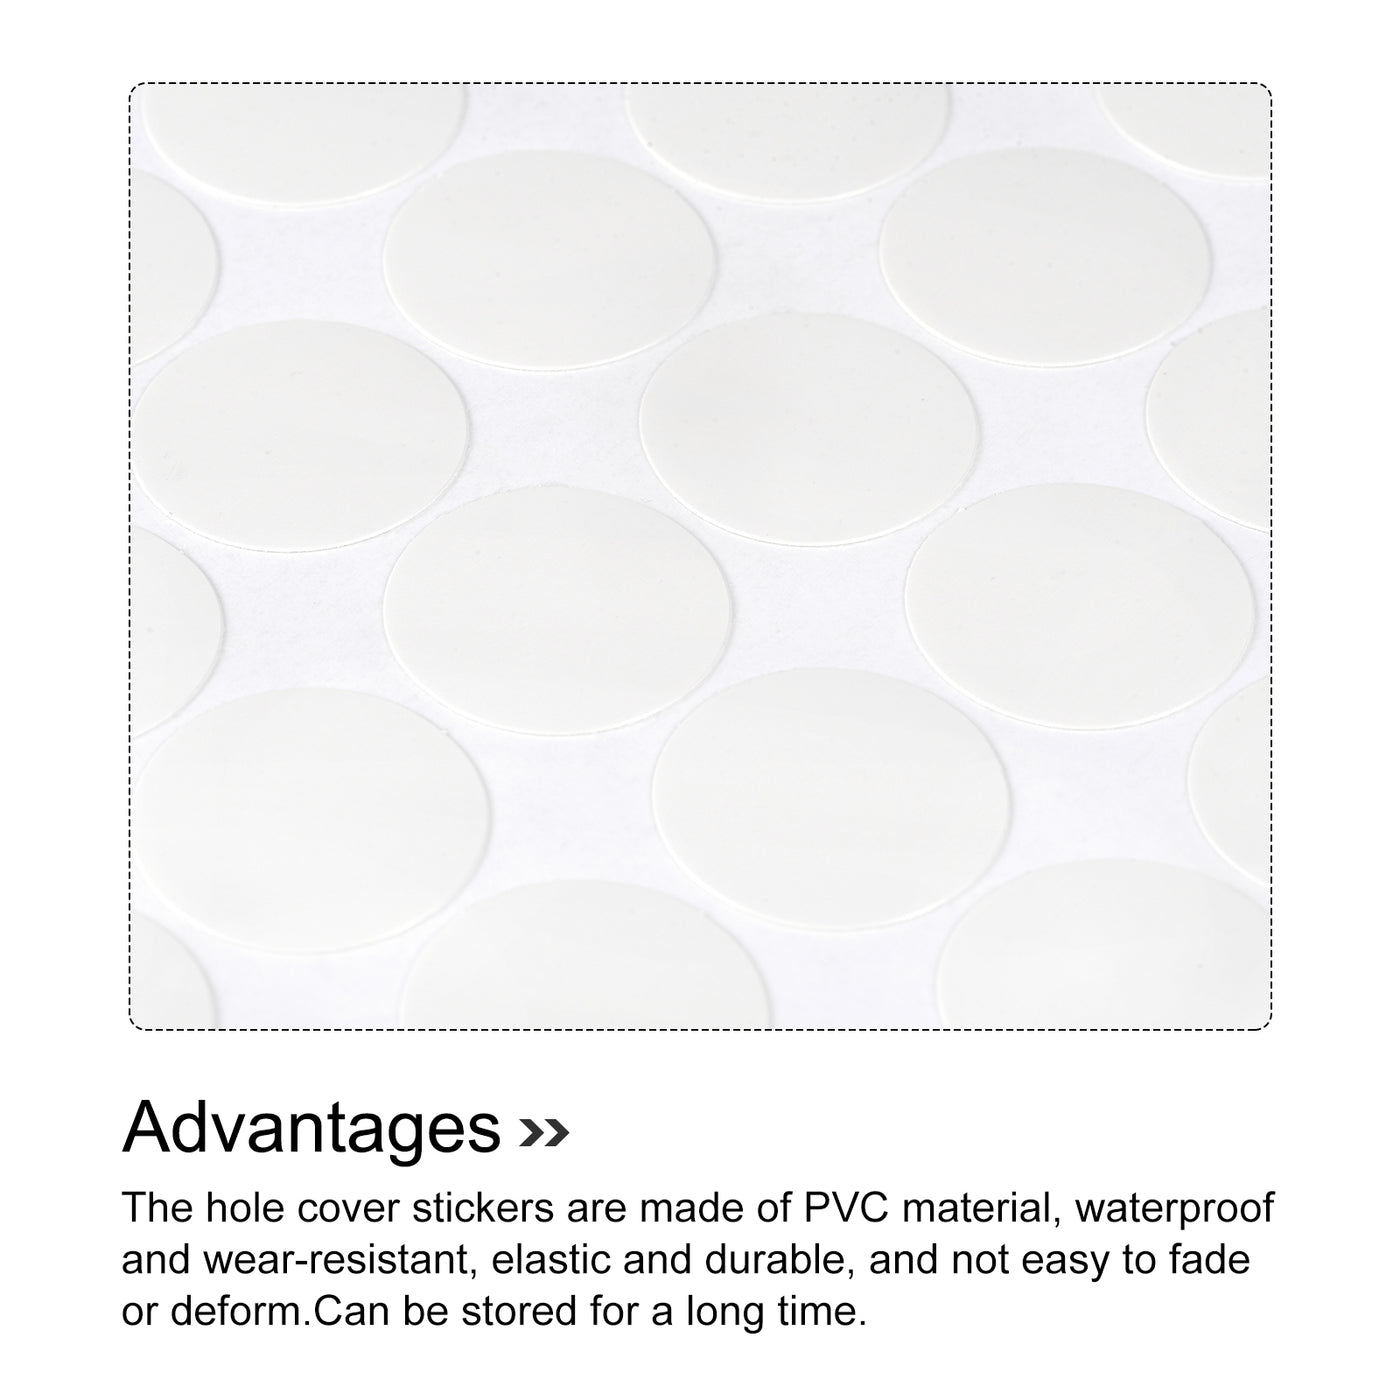 uxcell Uxcell Screw Hole Cover Stickers, 12mm Dia PVC Self Adhesive Covers Caps for Wood Furniture Cabinet Shelf Wardrobe, White 6 Sheet/840pcs